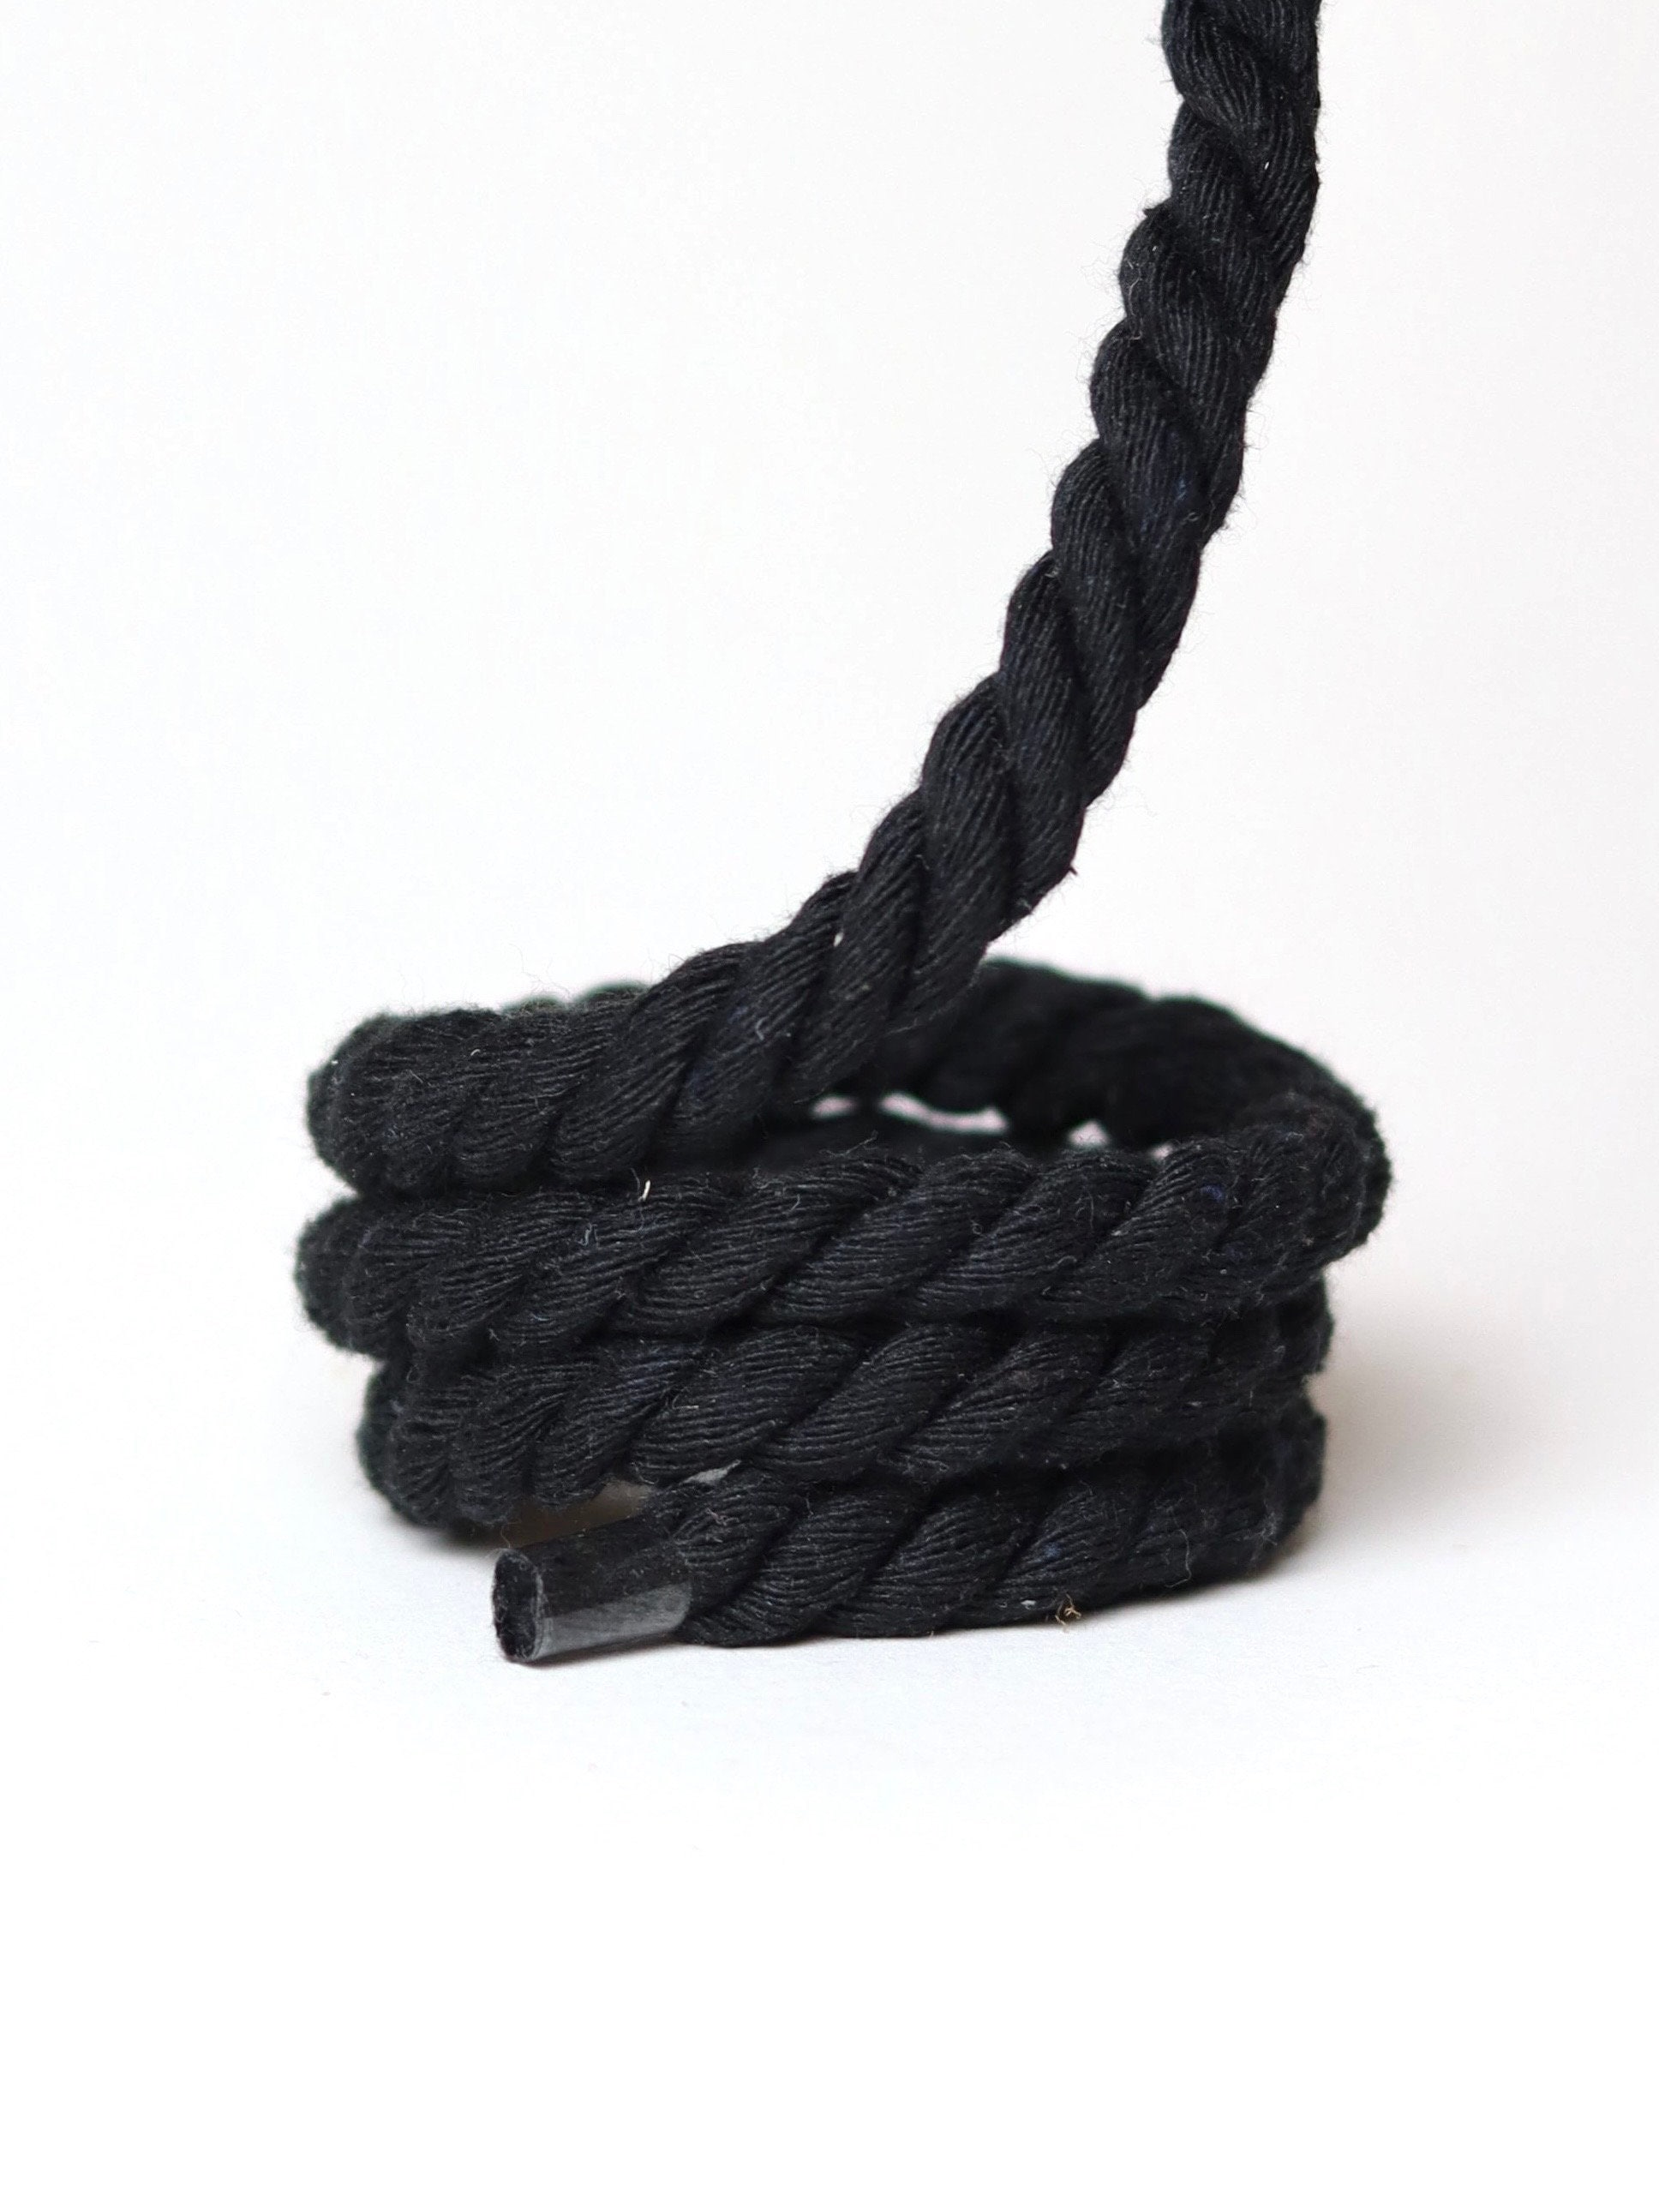 Chunky Custom Rope Laces 10mm Black, Funny DIY Natural Texture Shoelaces,  Thick Twisted Shoe Laces, Cotton Round Laces, Sneakers Laces 